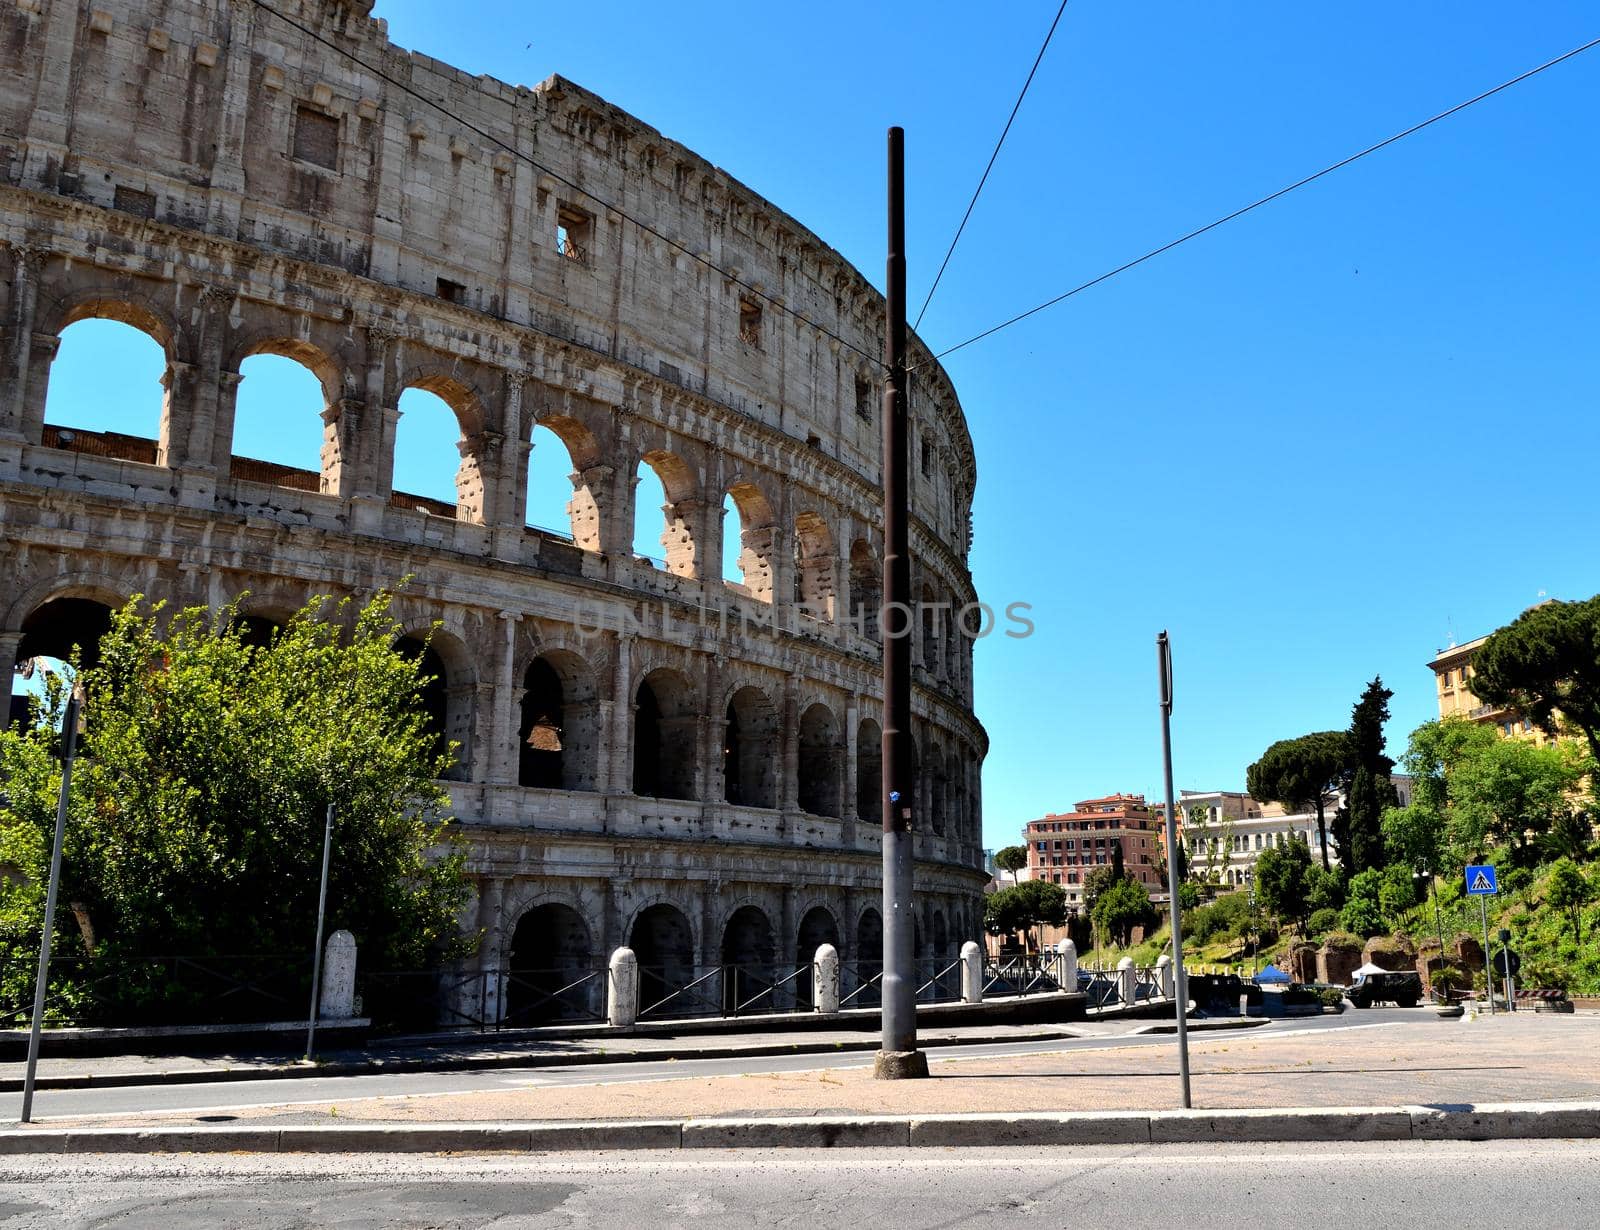 View of the Colosseum without tourists due to the phase 2 of lockdown by silentstock639